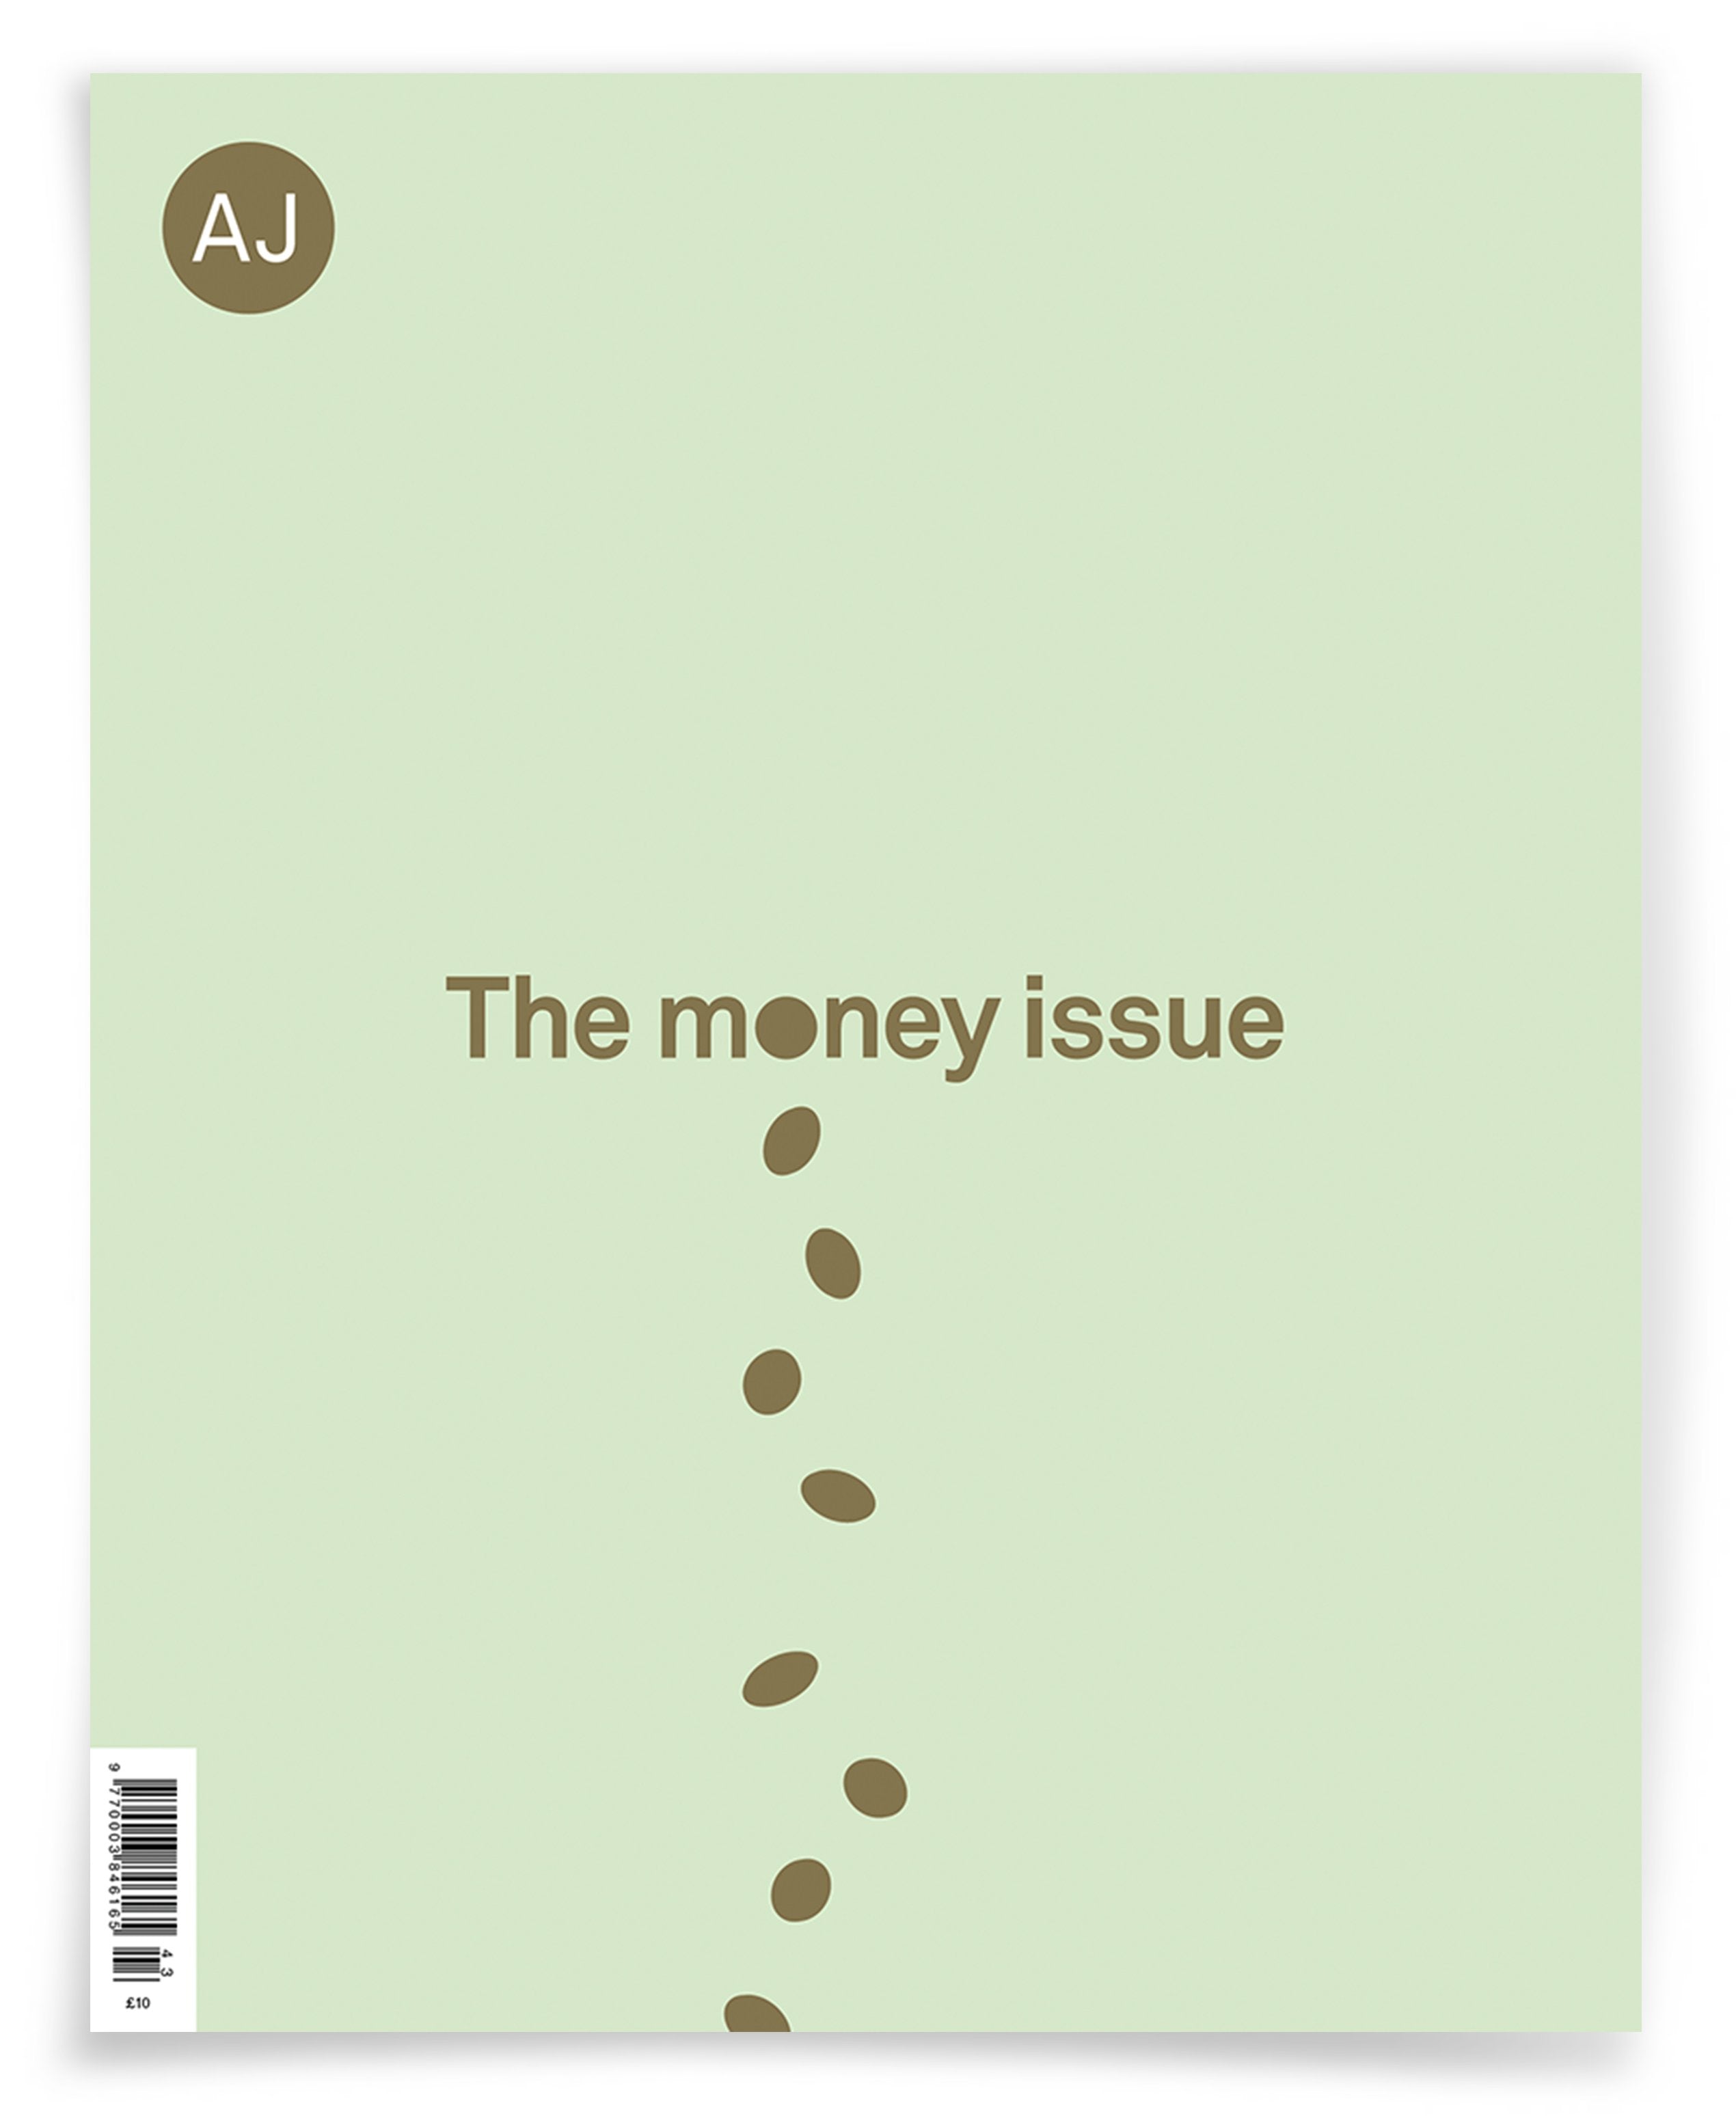 AJ 25.10.18: The money issue